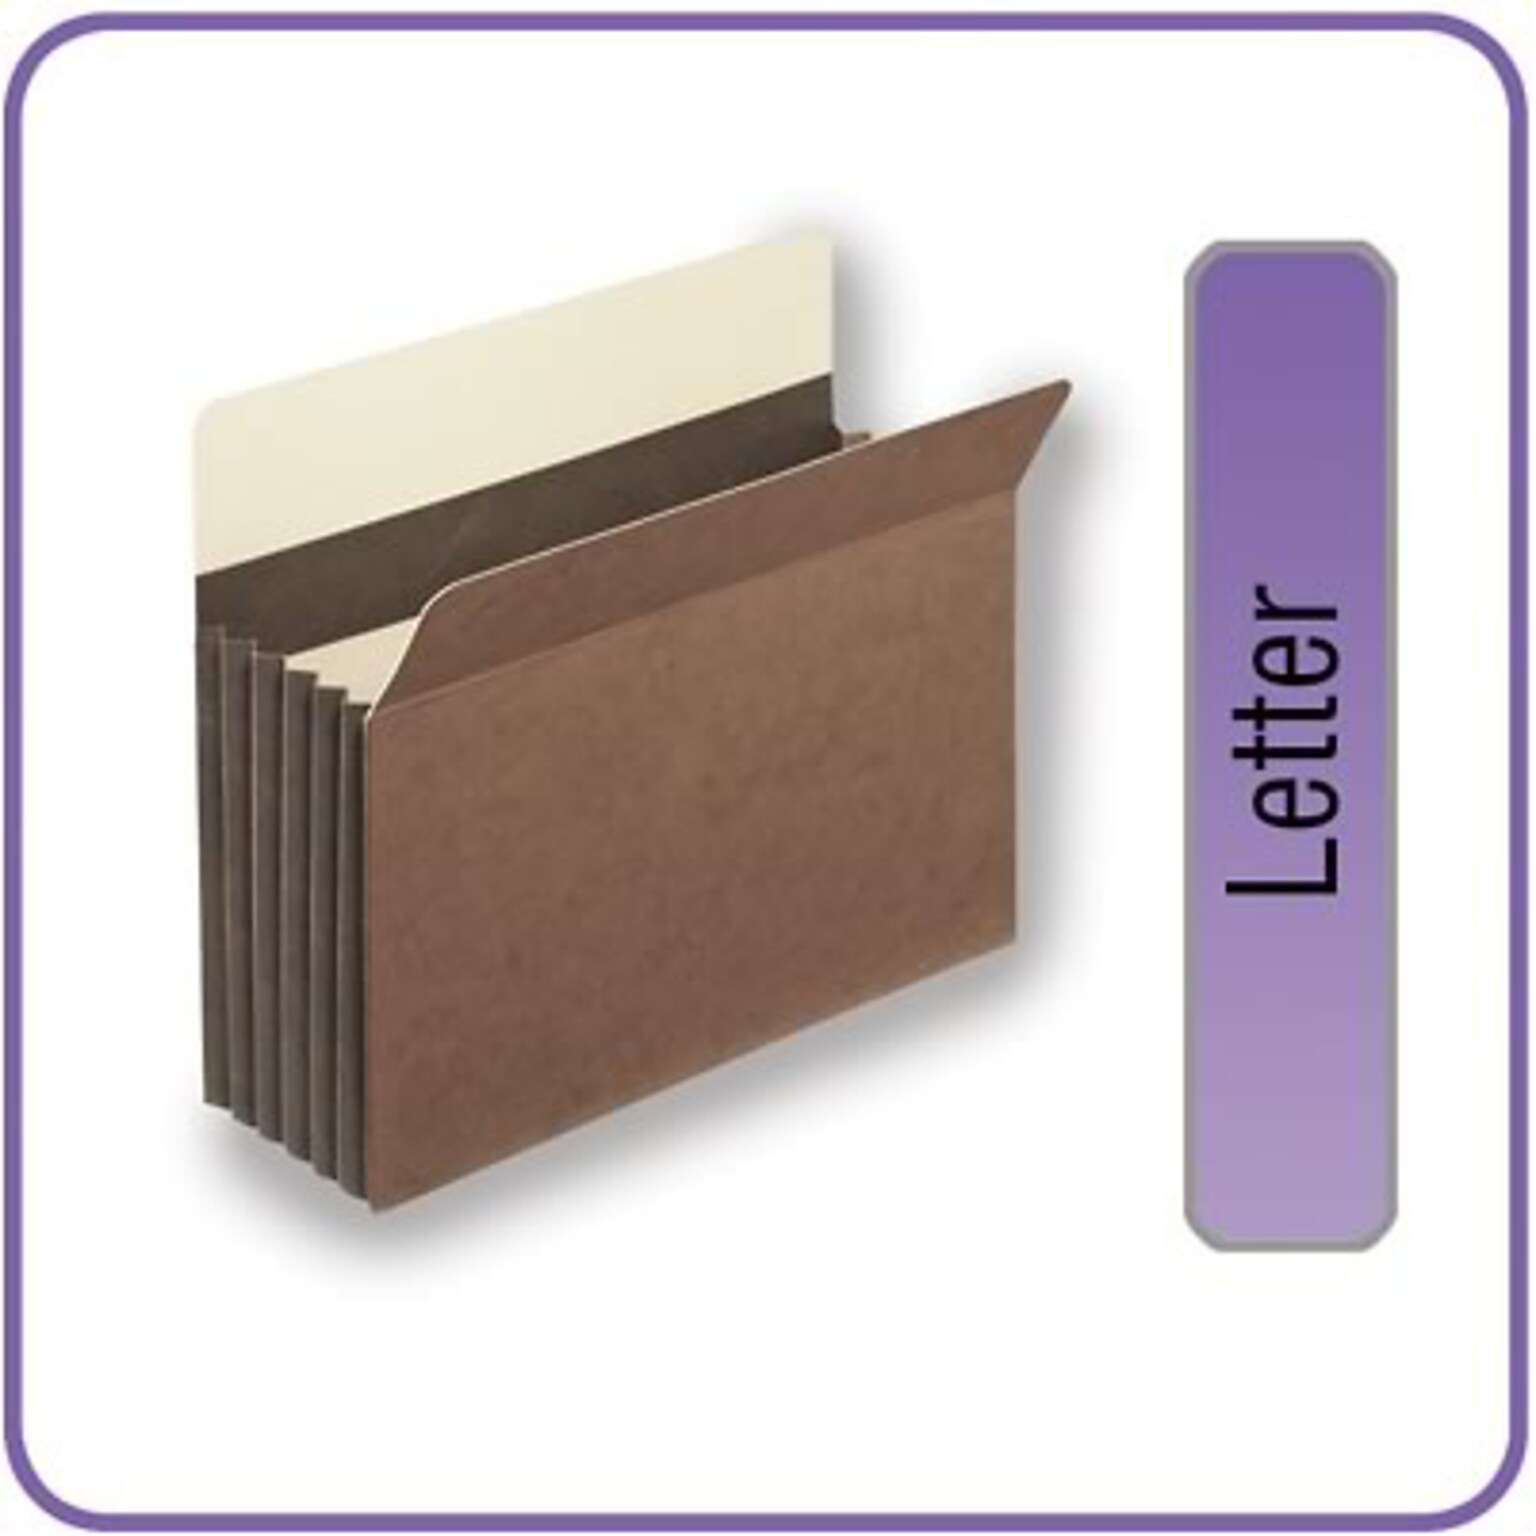 Quill Brand® Heavy Duty Reinforced File Pocket, 5 1/4 Expansion, Letter Size, Brown, 10/Box (7C1534)